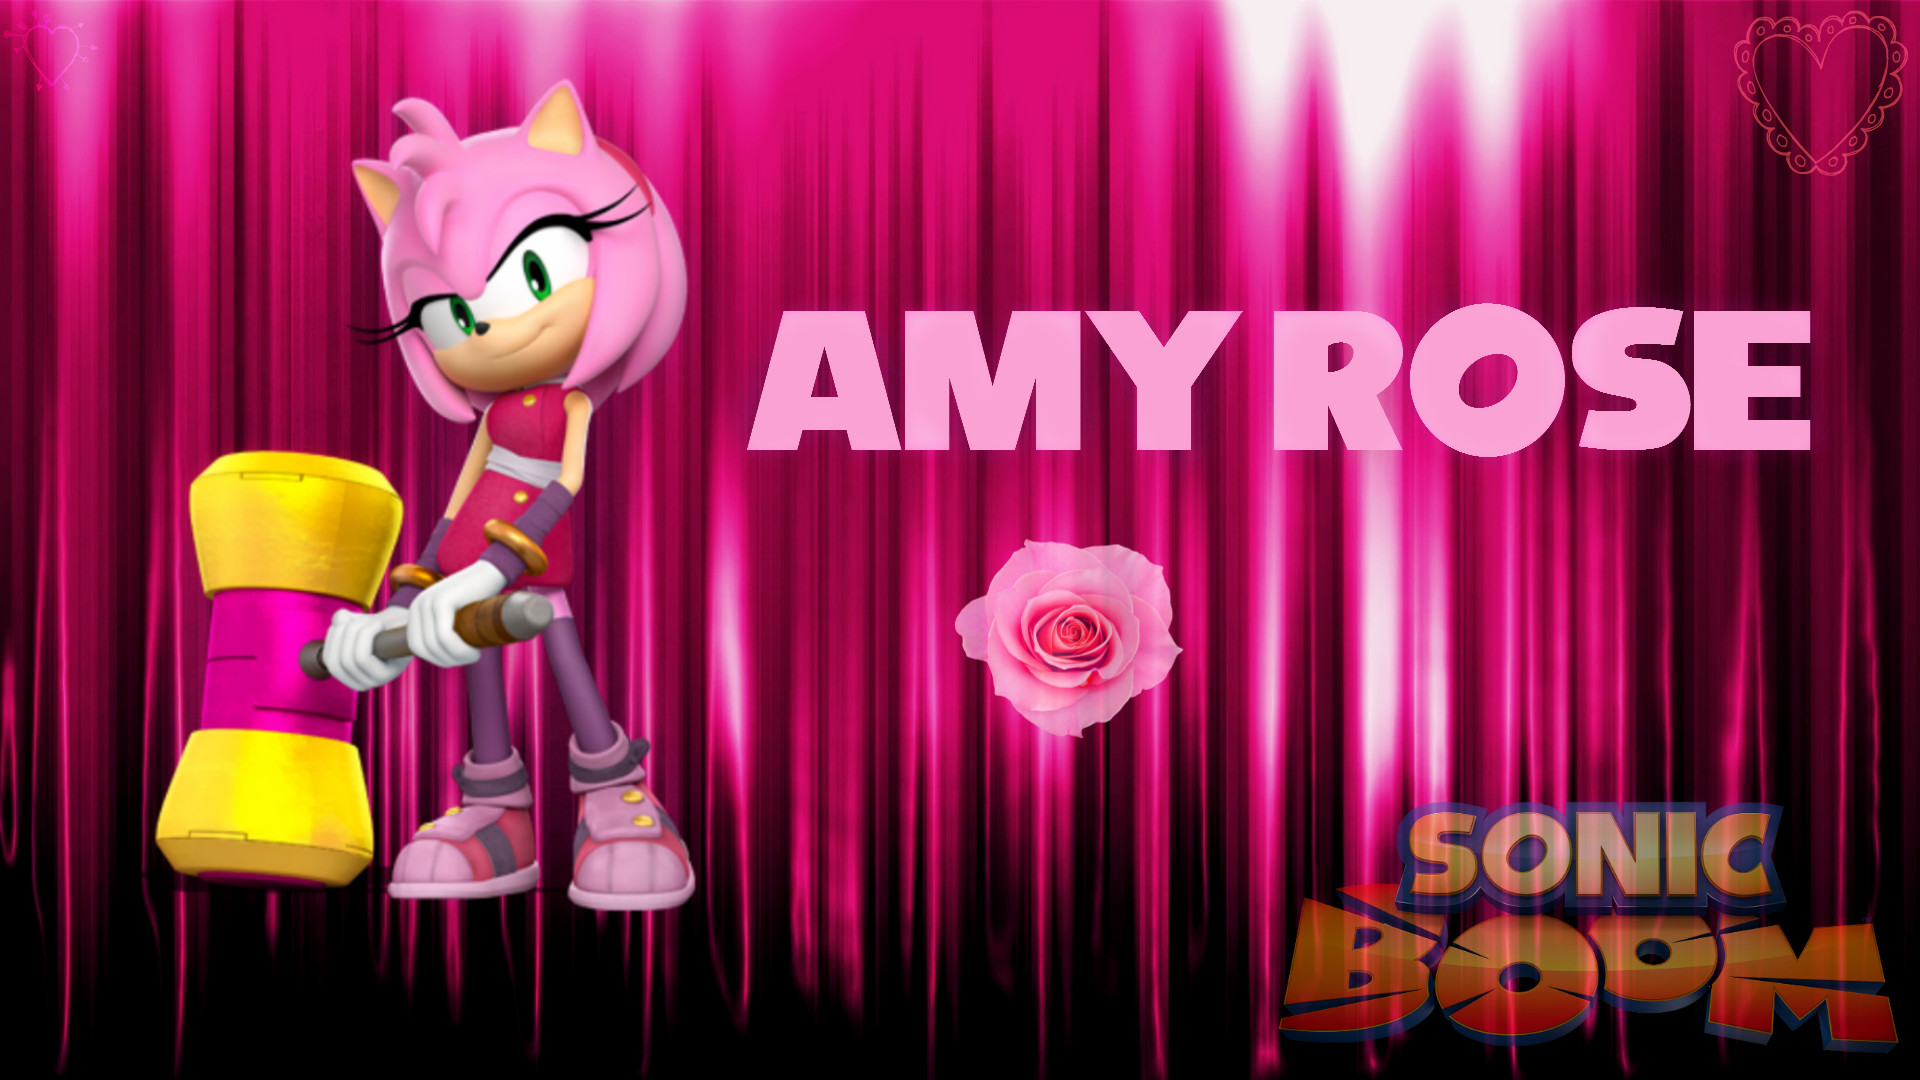 1920x1080 ... Sonic Boom: Amy Rose Wallpaper by Haalyle